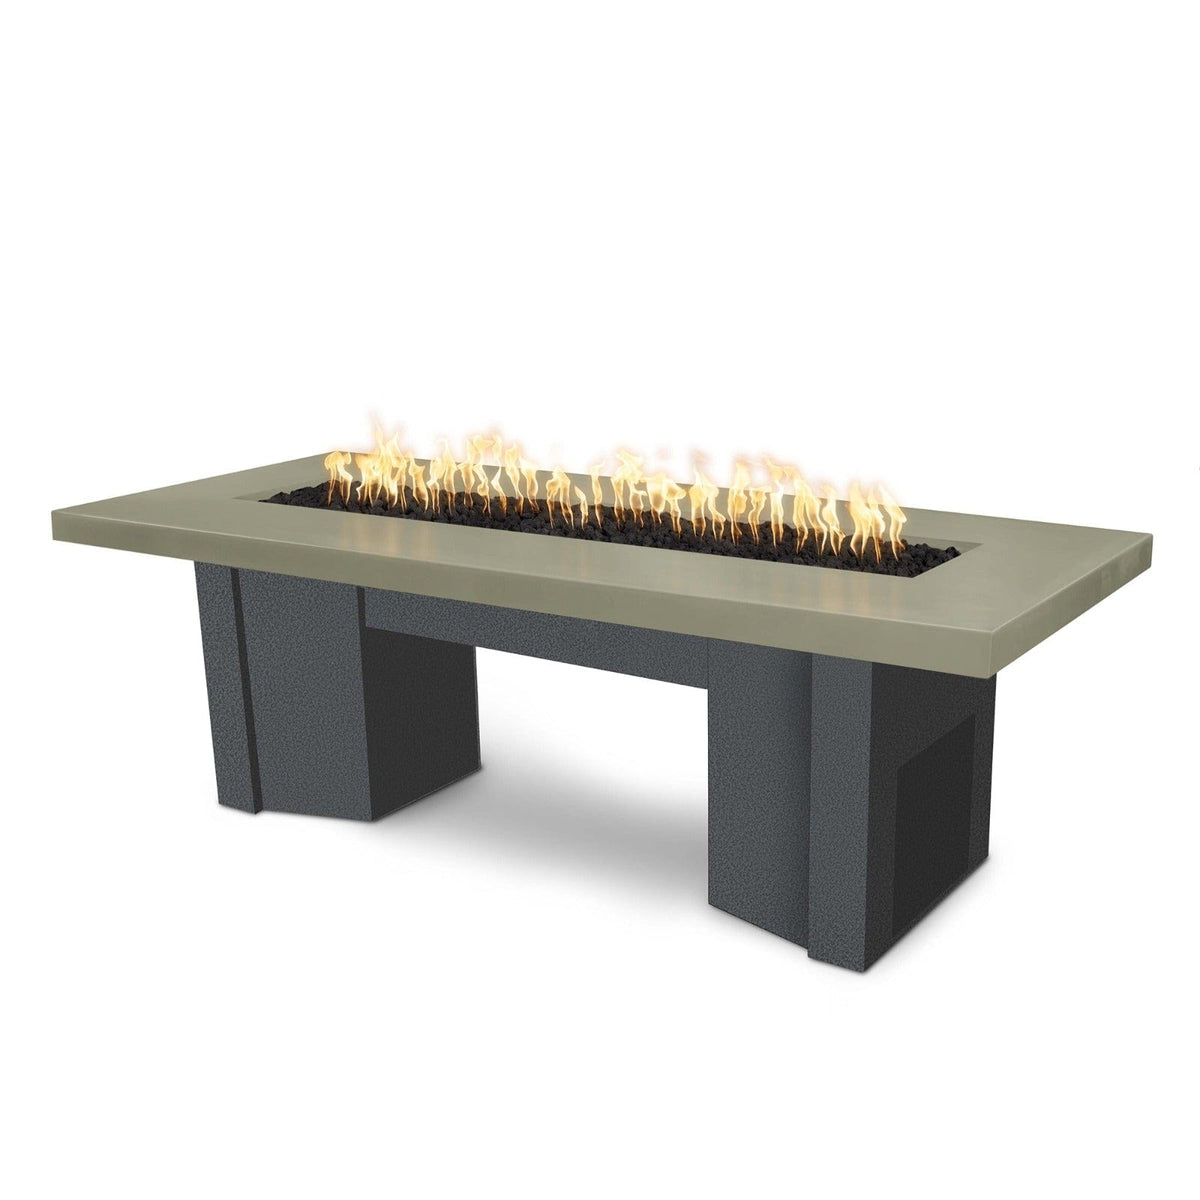 The Outdoor Plus Fire Features Ash (-ASH) / Silver Vein Powder Coated Steel (-SLV) The Outdoor Plus 78&quot; Alameda Fire Table Smooth Concrete in Liquid Propane - Flame Sense System with Push Button Spark Igniter / OPT-ALMGFRC78FSEN-LP